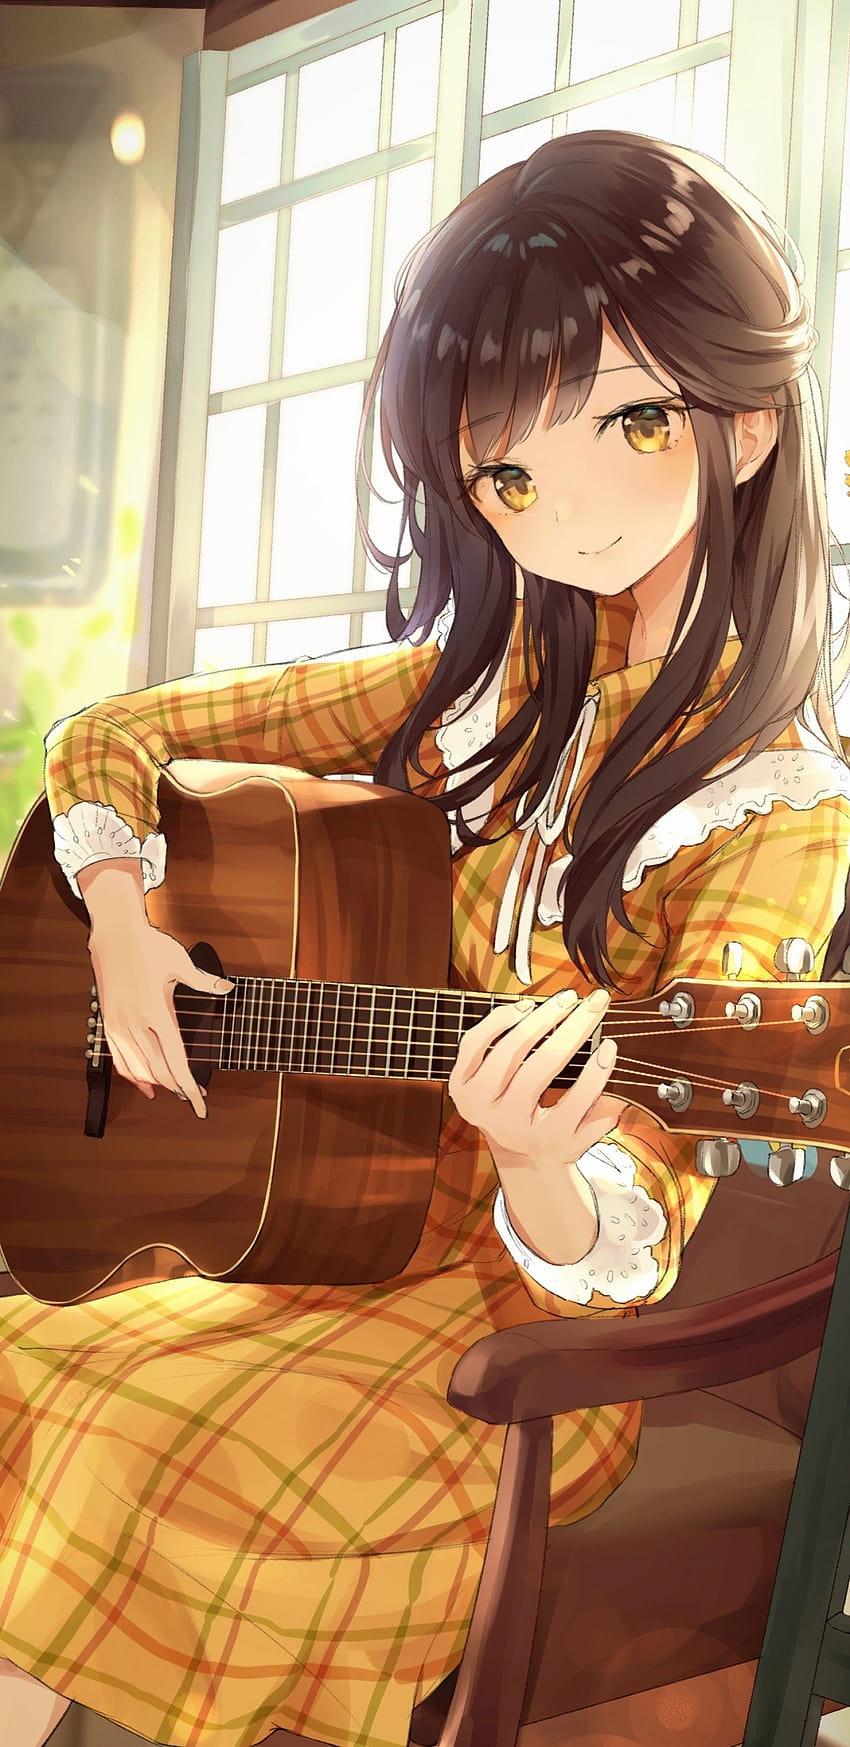 1440x2960 Anime Girl, Playing Guitar, Instrument, Music, Cute, Brown Hair for Samsung Galaxy S9, Note 9, S8, S8+, Google Pixel 3 XL, anime guitar girl HD phone wallpaper